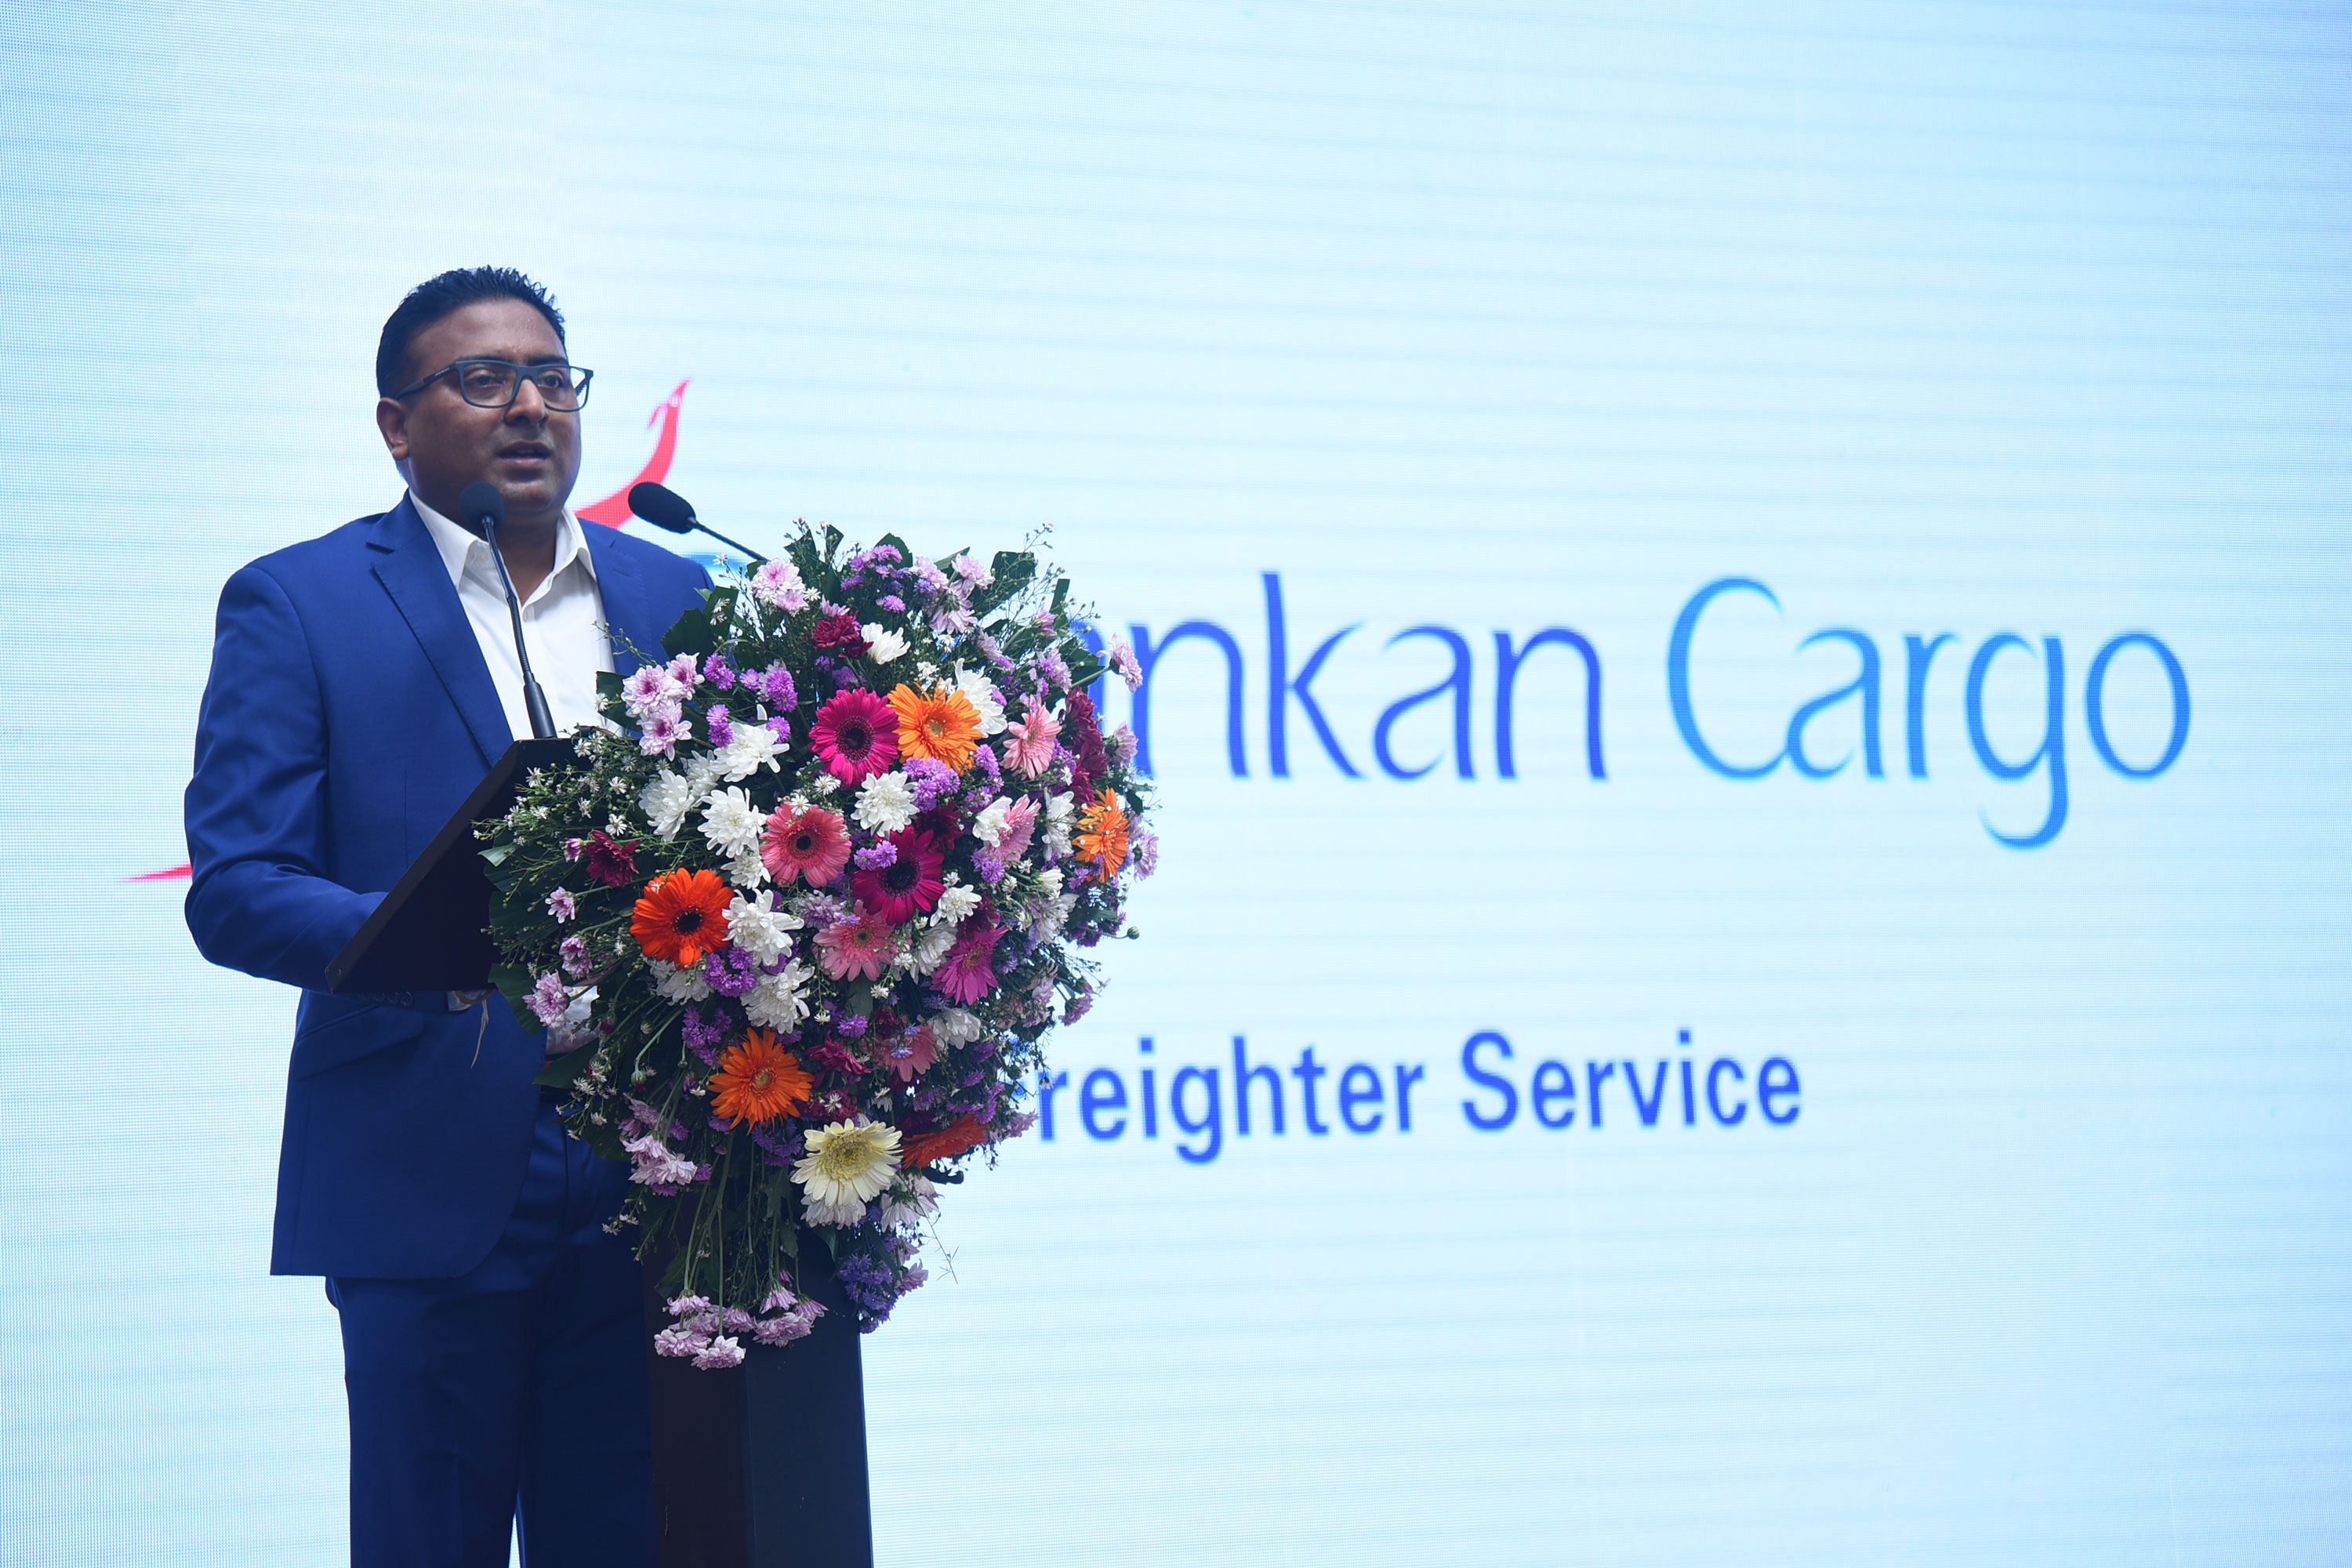 Mr. Chamara Ranasignhe, SriLankan Airlines’ Head of Cargo addressing the gathering at the launch